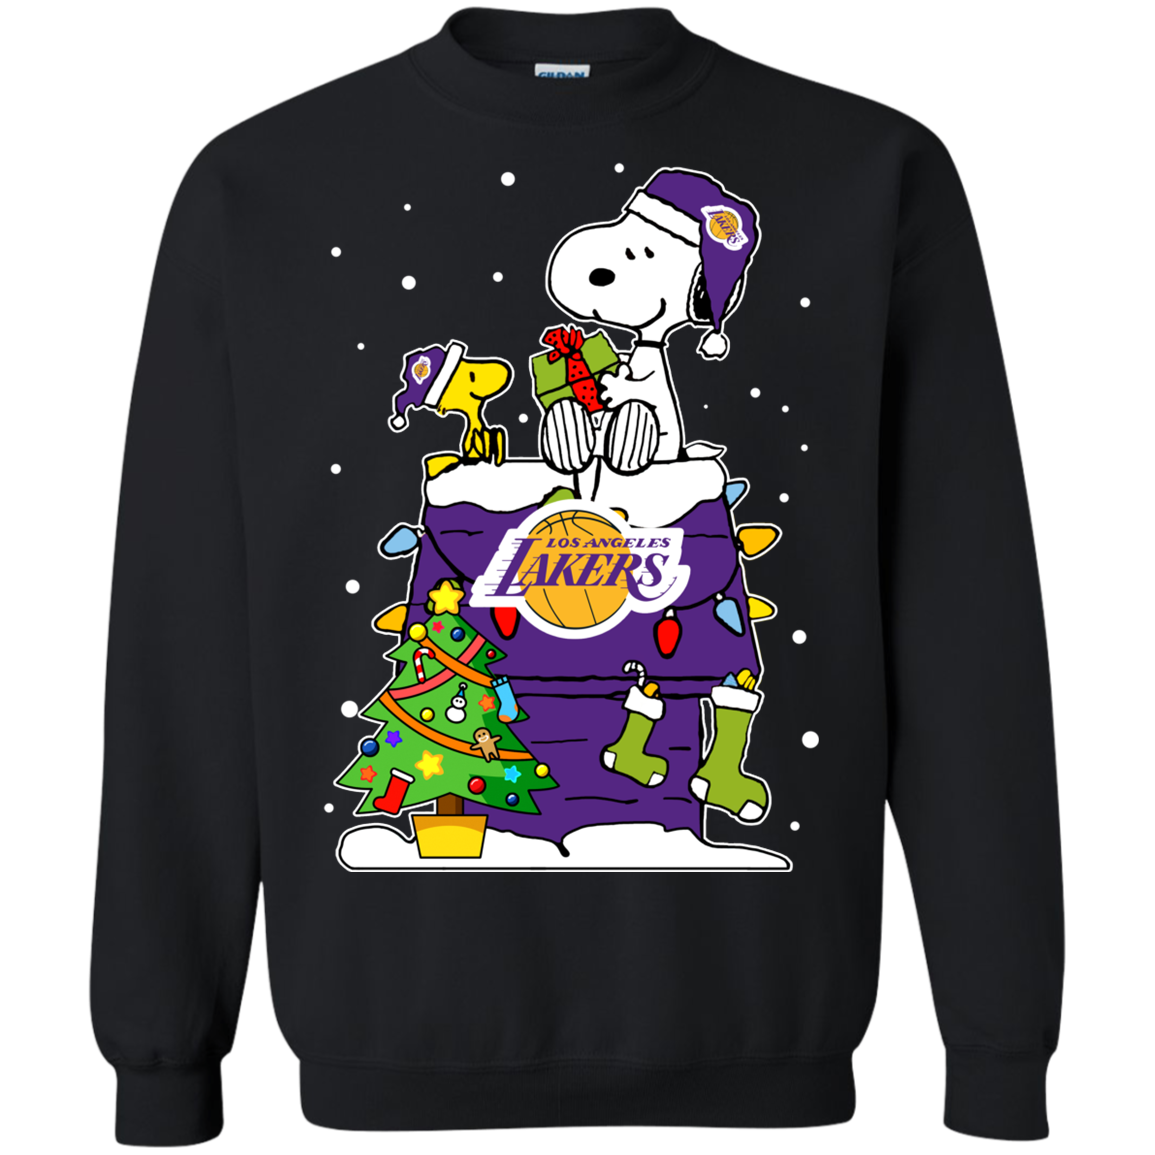 lakers ugly christmas sweater